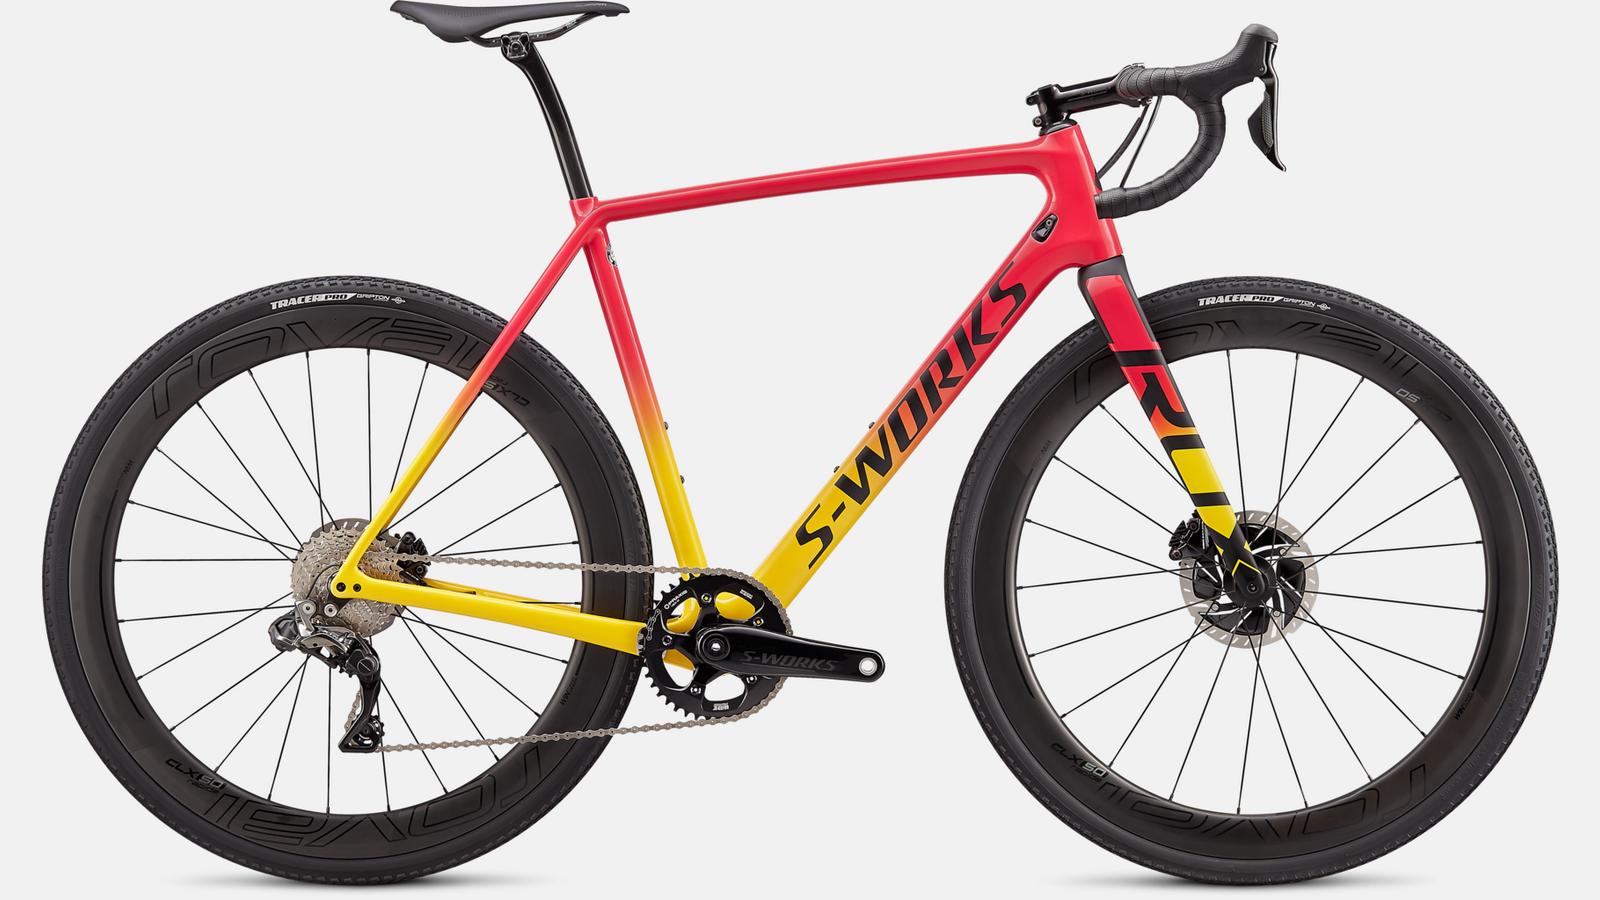 Paint for 2020 Specialized S-Works CruX - Gloss Golden Yellow